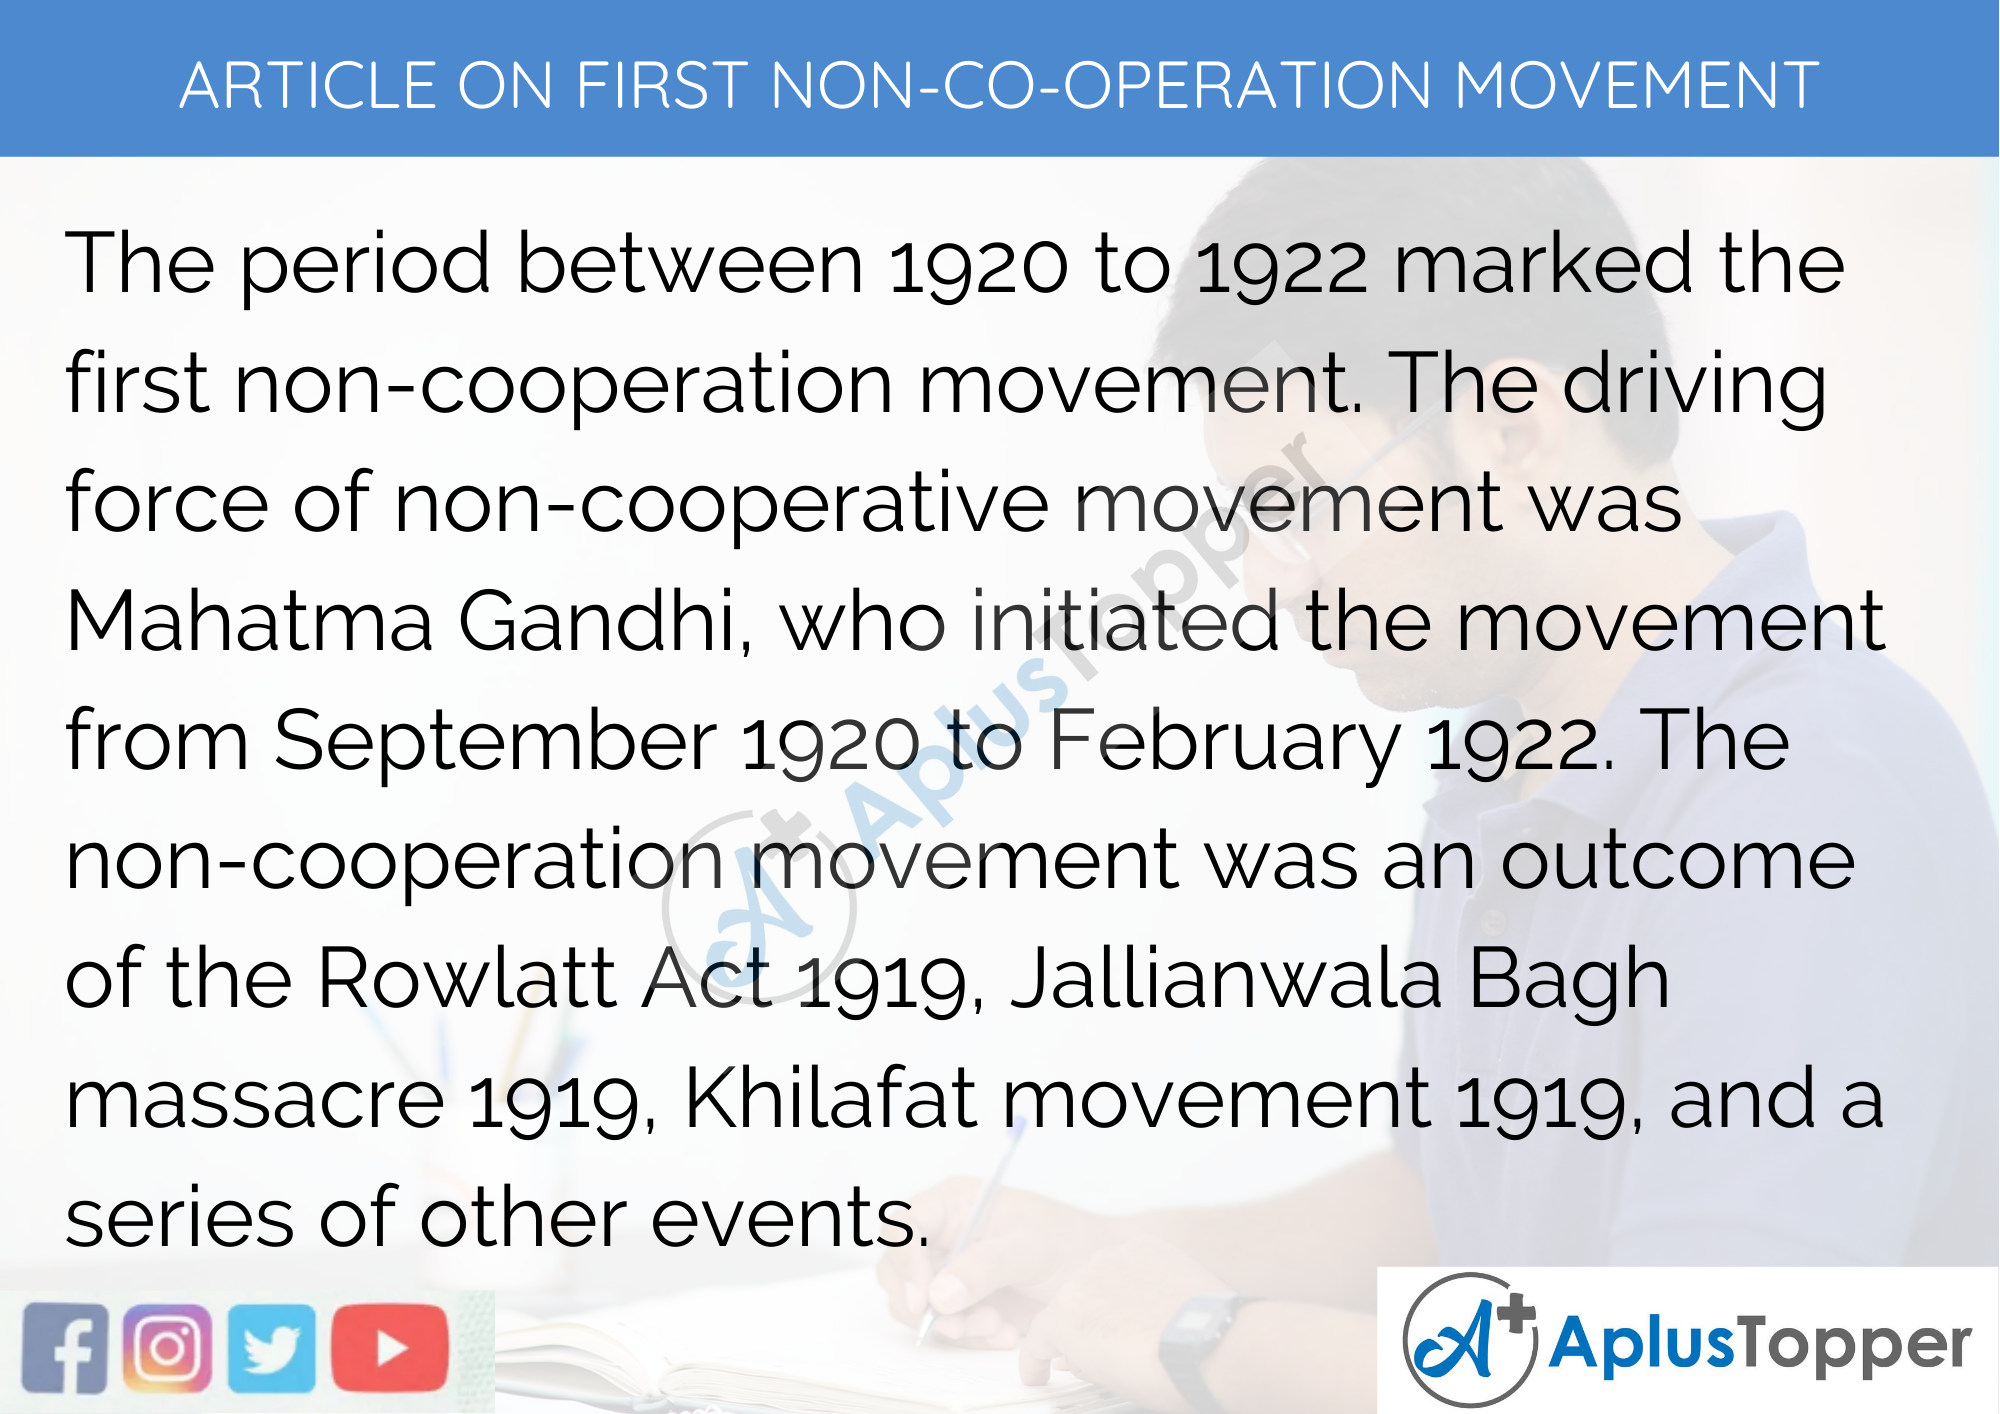 Long Article on First Non-Cooperation Movement from 1920 to 1922 in English 500 Words